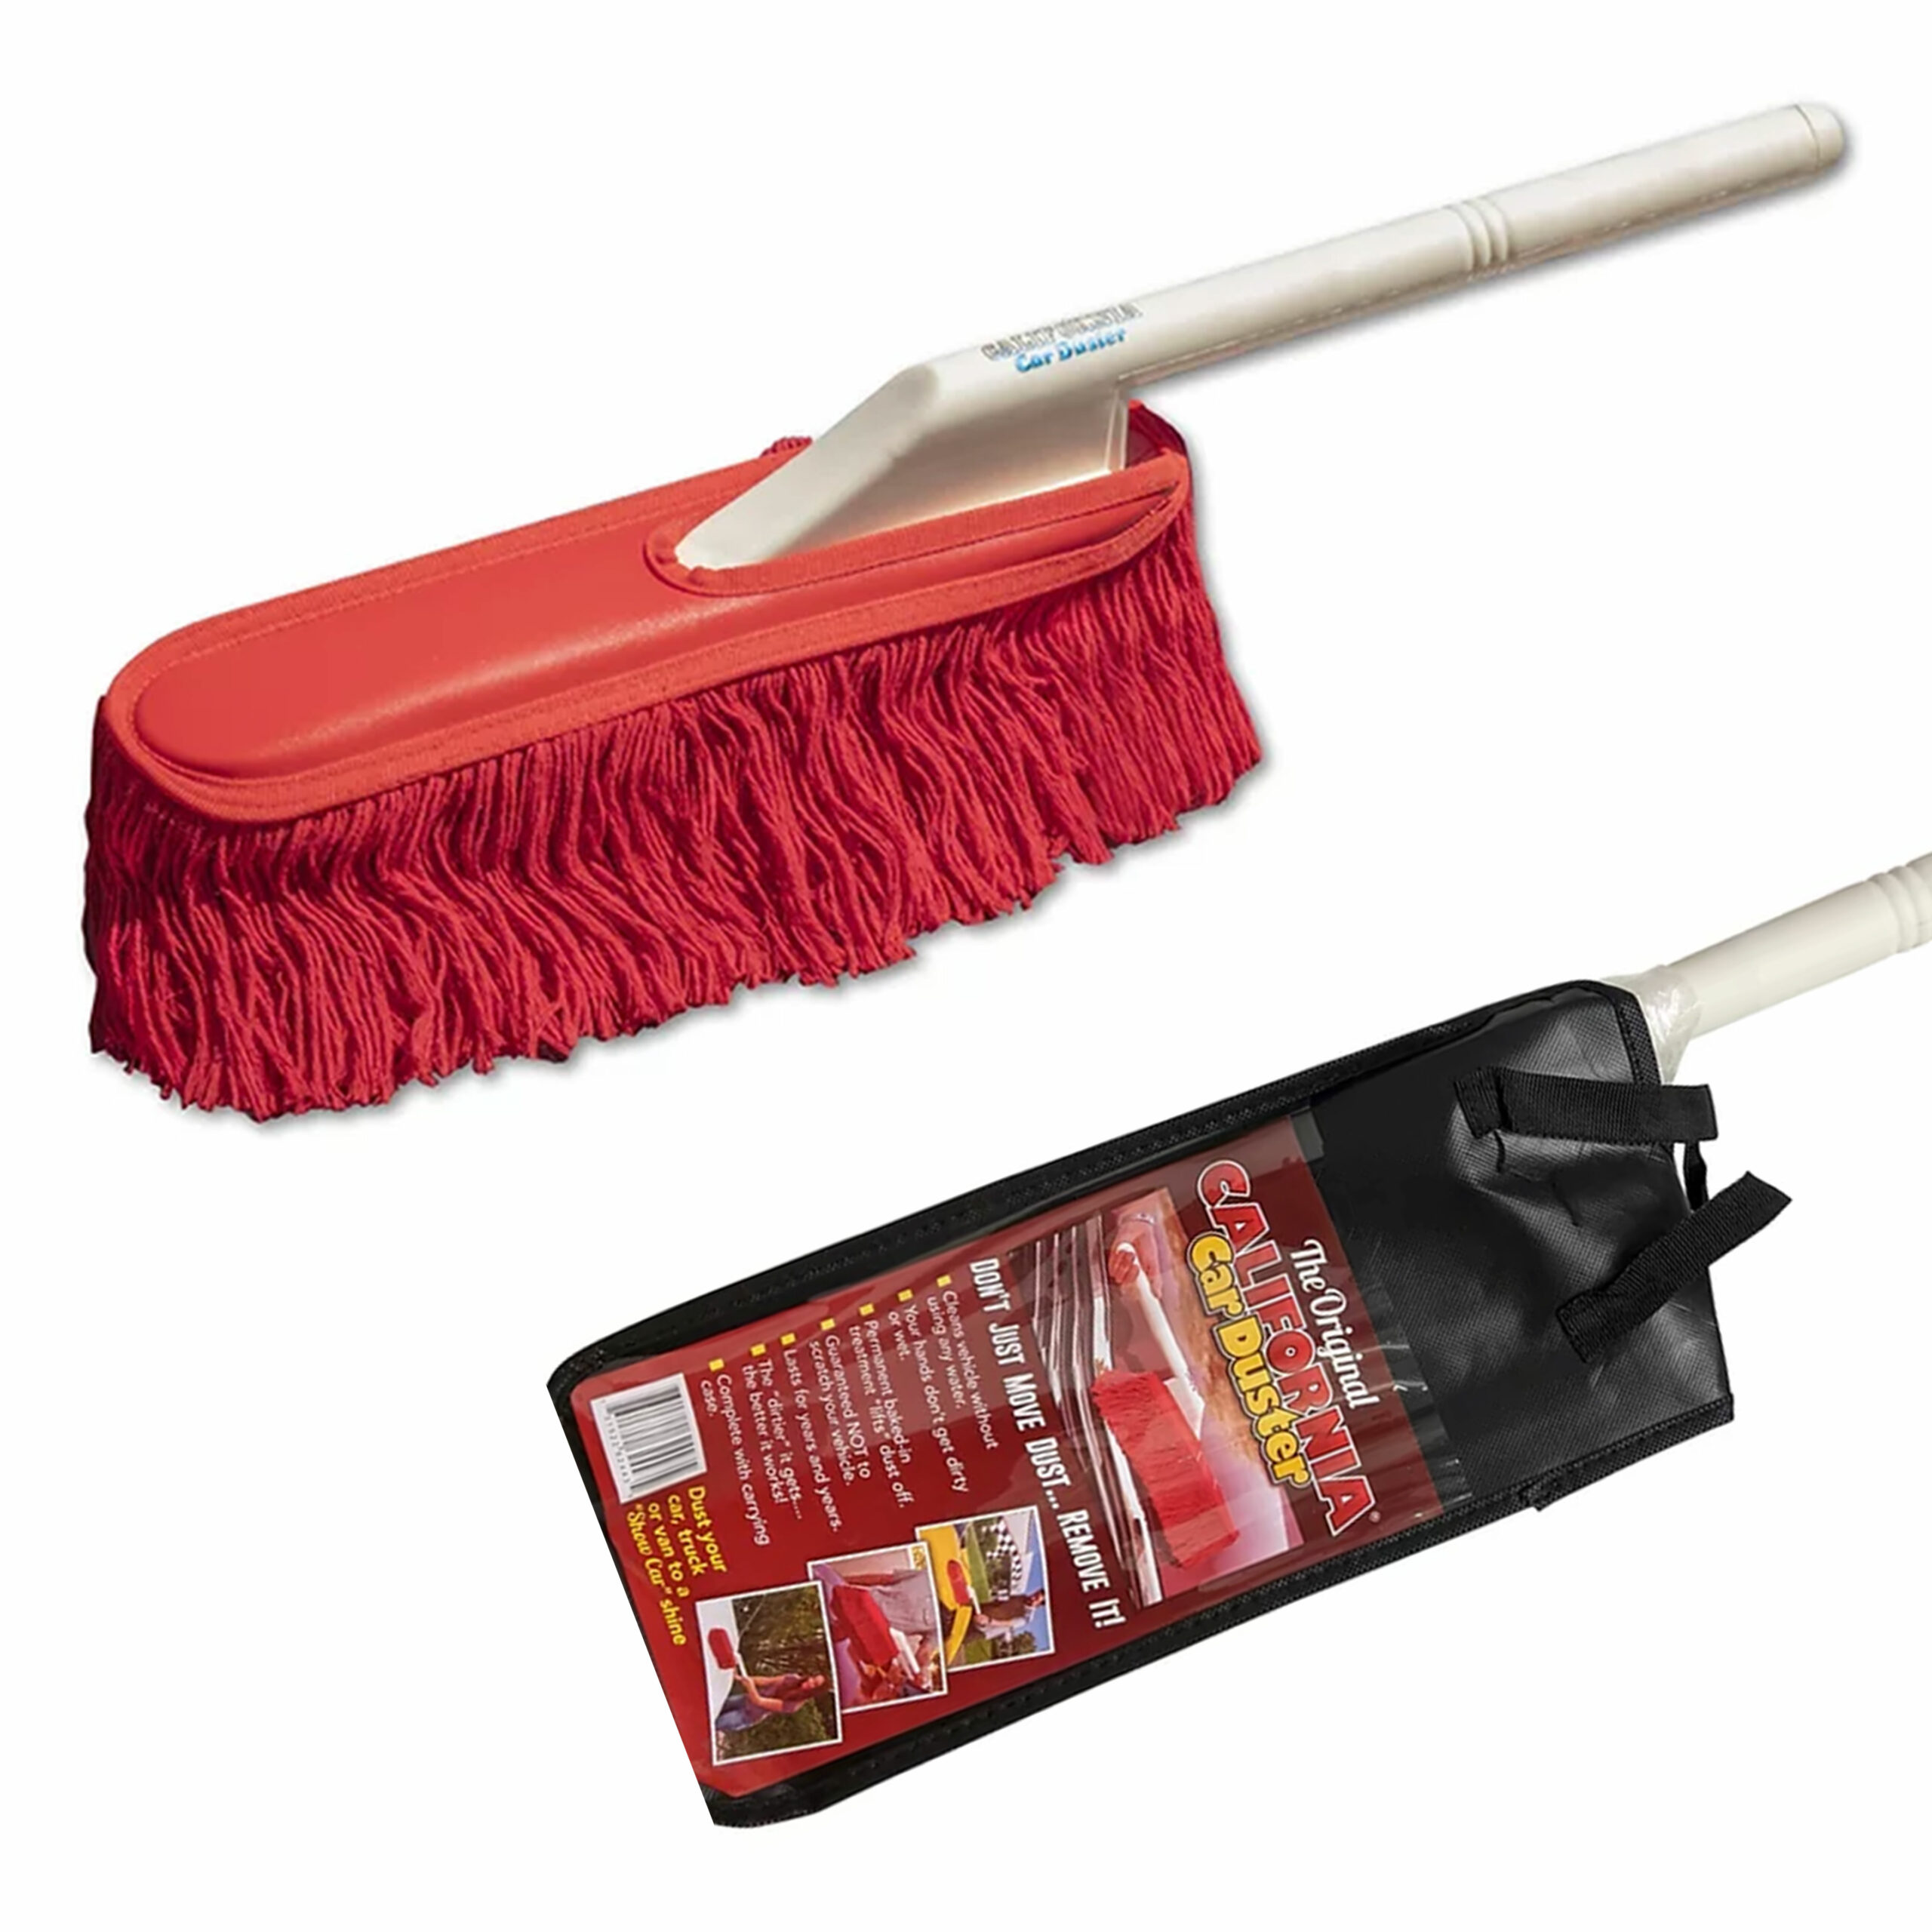 Where to Buy  California Car Duster